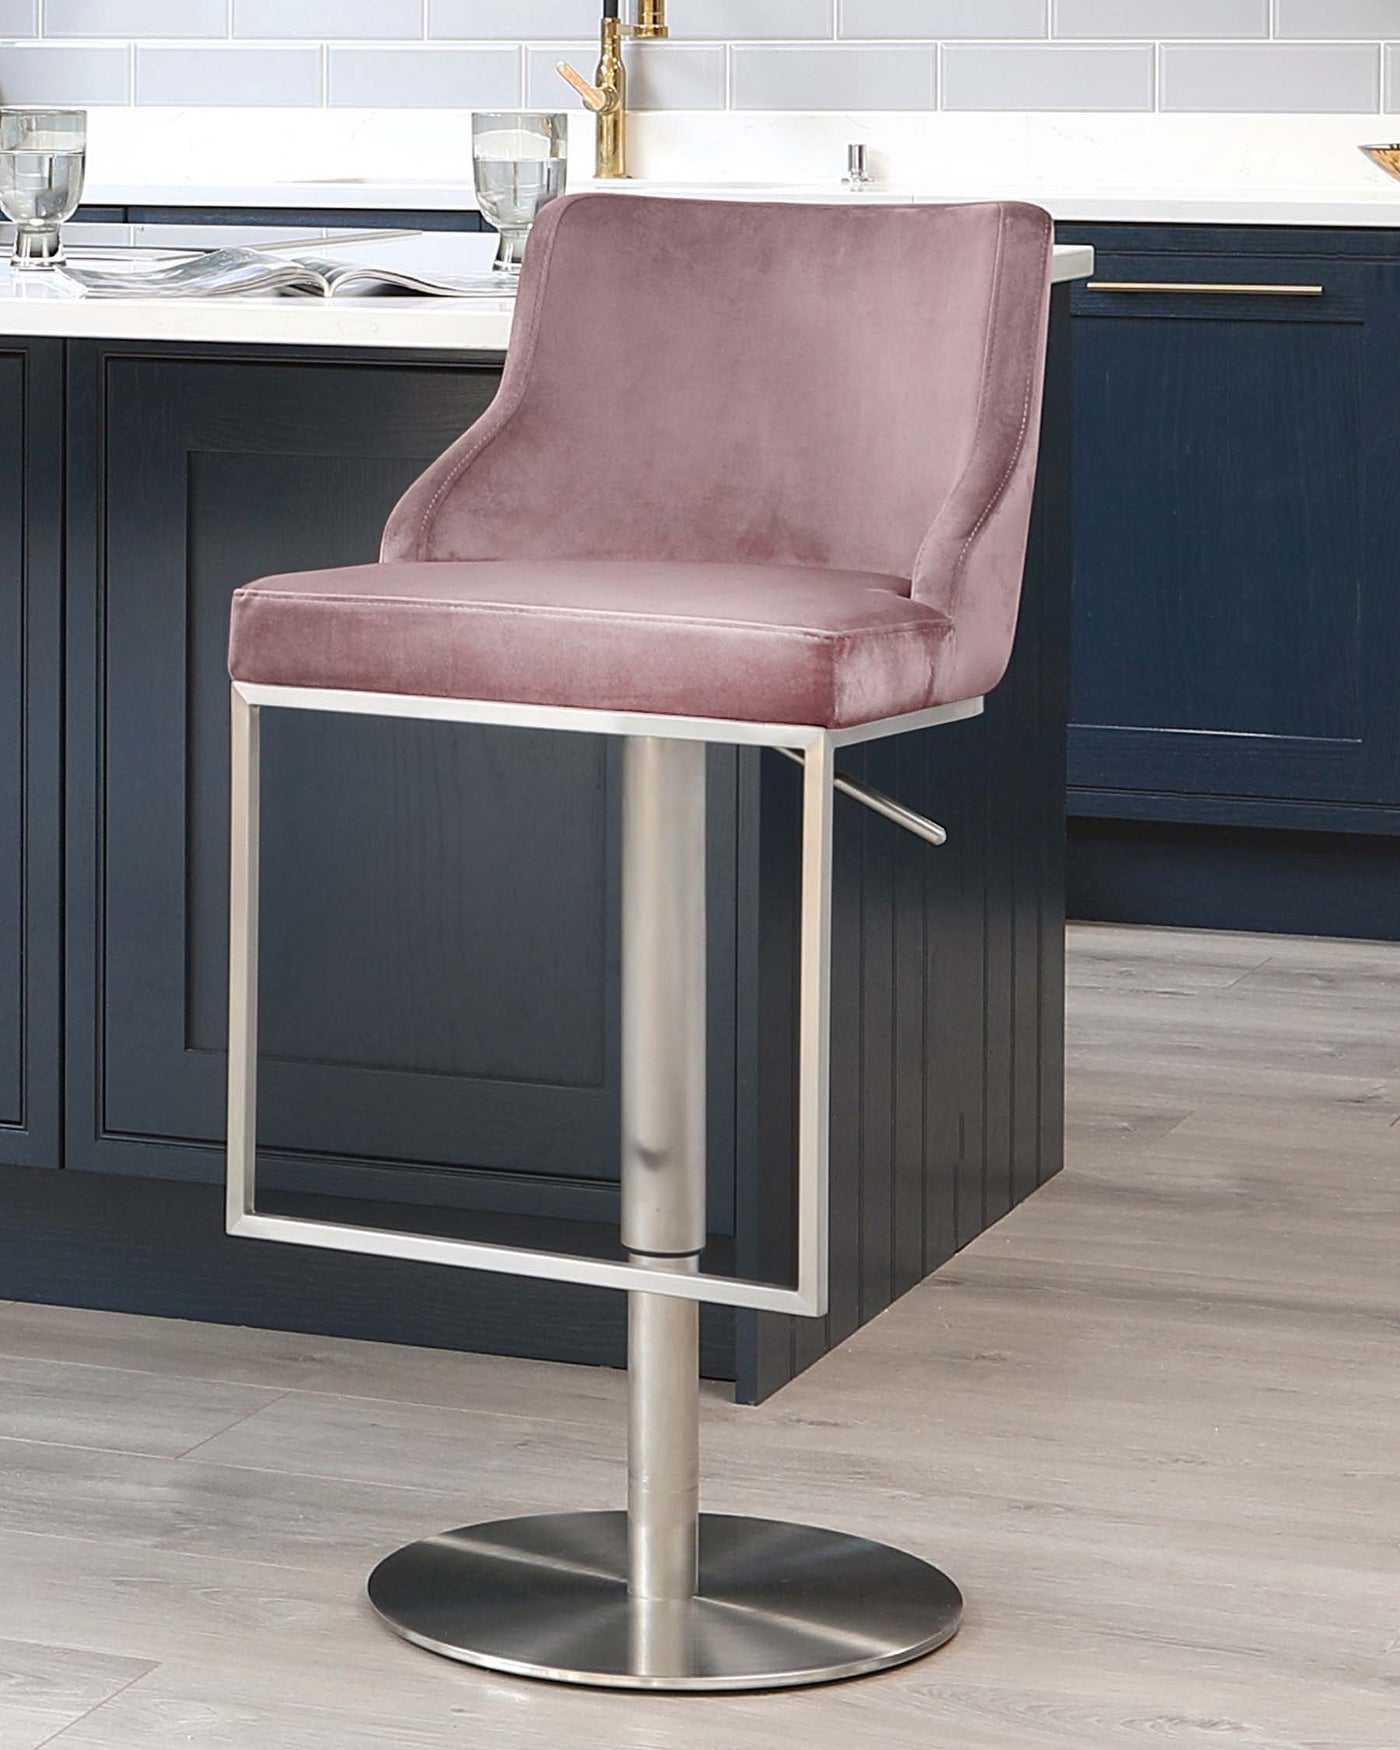 Form Blush Pink Velvet And Stainless Steel Gas Lift Bar Stool